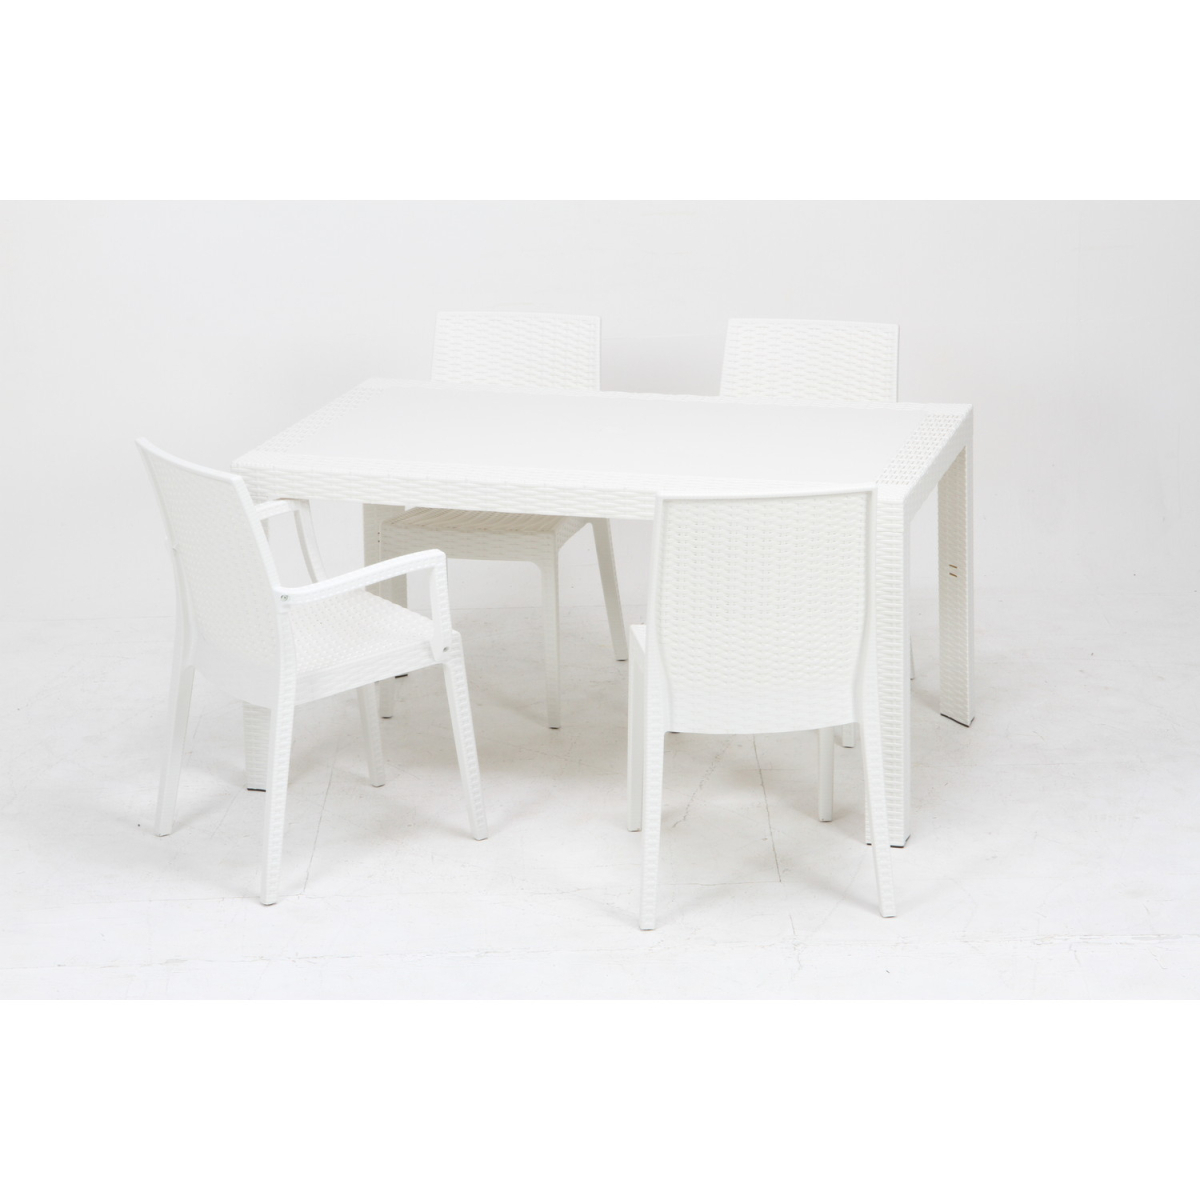  Italy made garden table rattan manner width 140cm white [ new goods ][ free shipping ( one part excepting )]